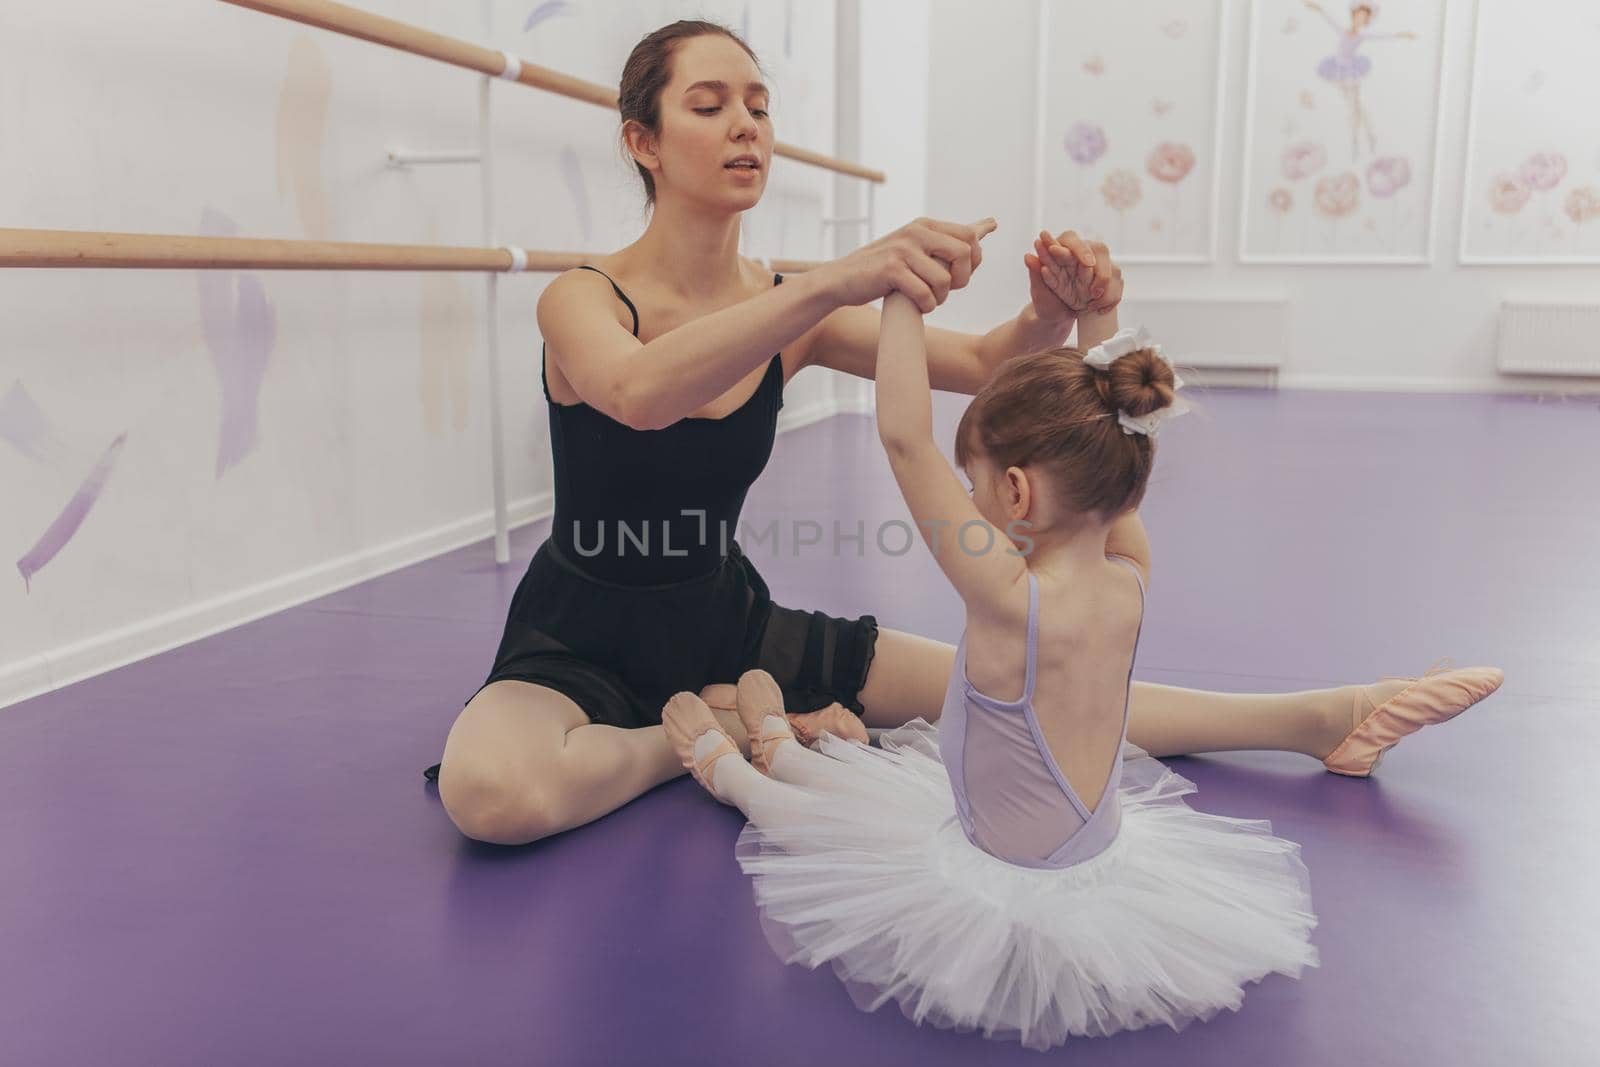 Adorable little ballerina exercising with her ballet teacher at dance school. Beautiful young woman ballet dancer teaching her little student. Education, experience, achievement concept